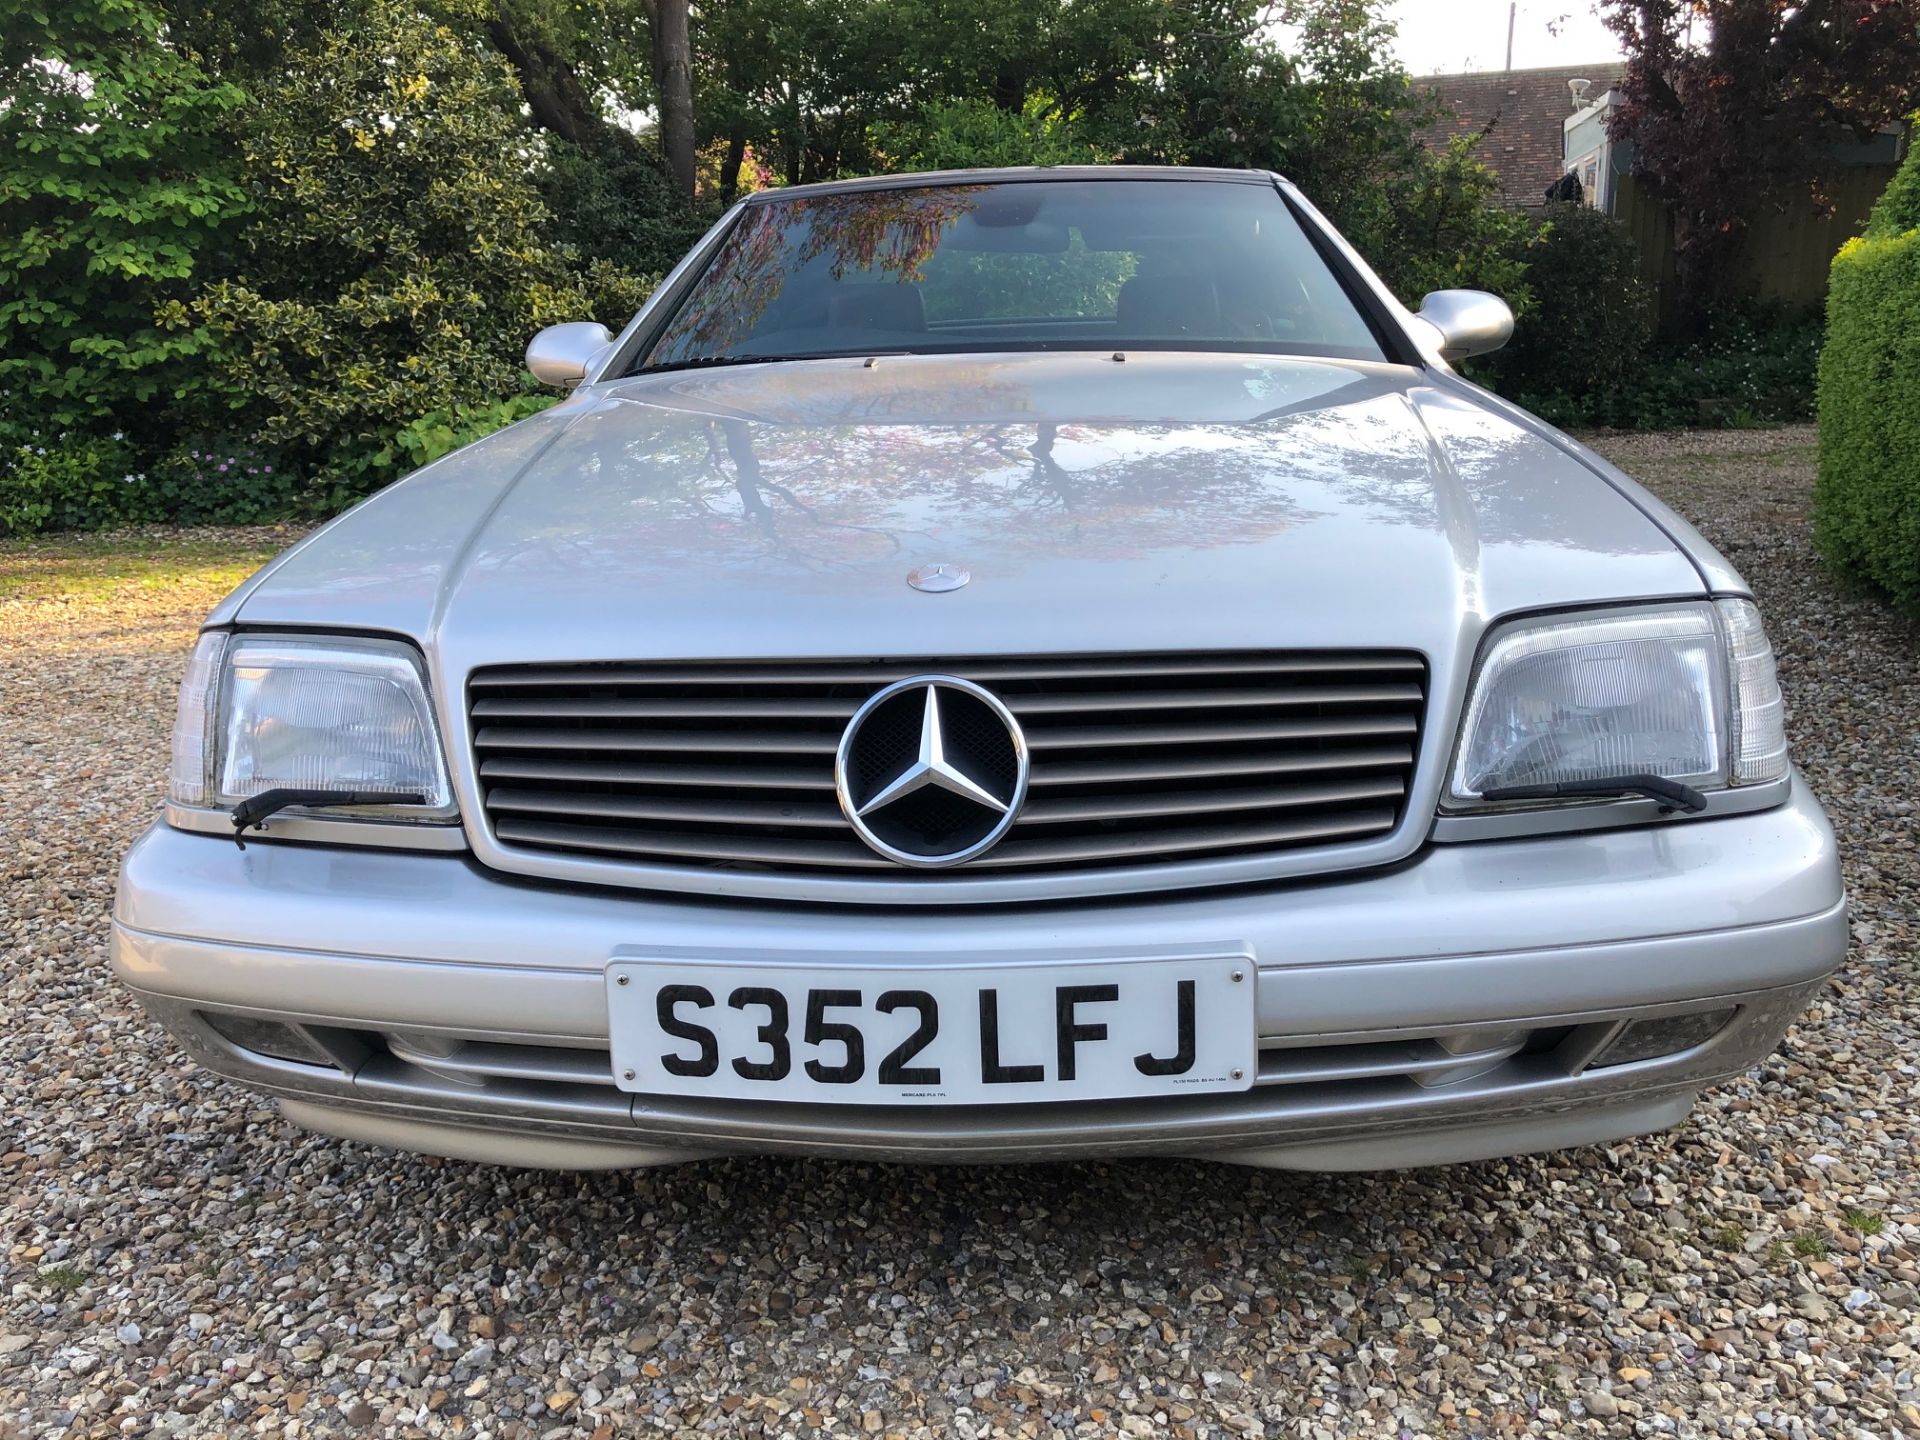 A 1998 Mercedes-Benz 320 SL Registration number S352 LFJ MOT expired March 2020 Metallic silver with - Image 2 of 57